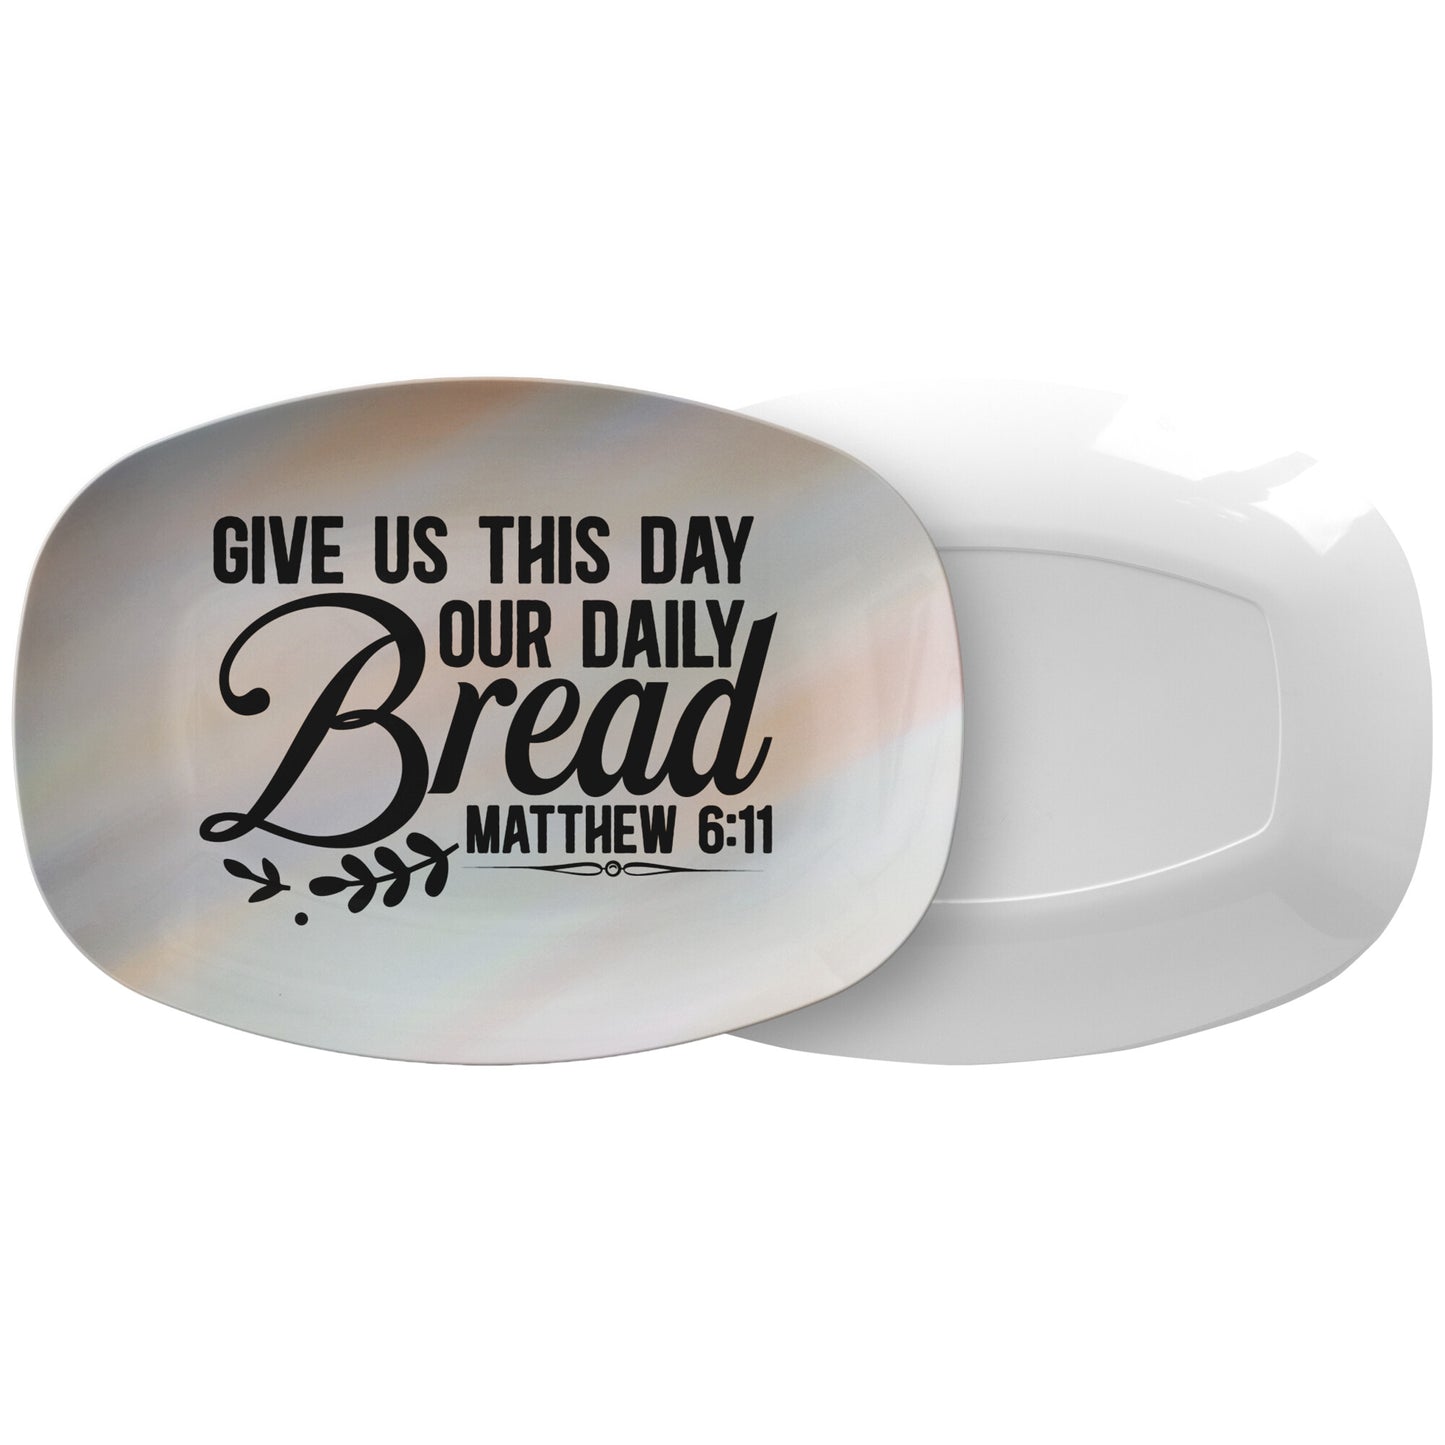 Give Us This Day Our Daily Bread Serving Platter